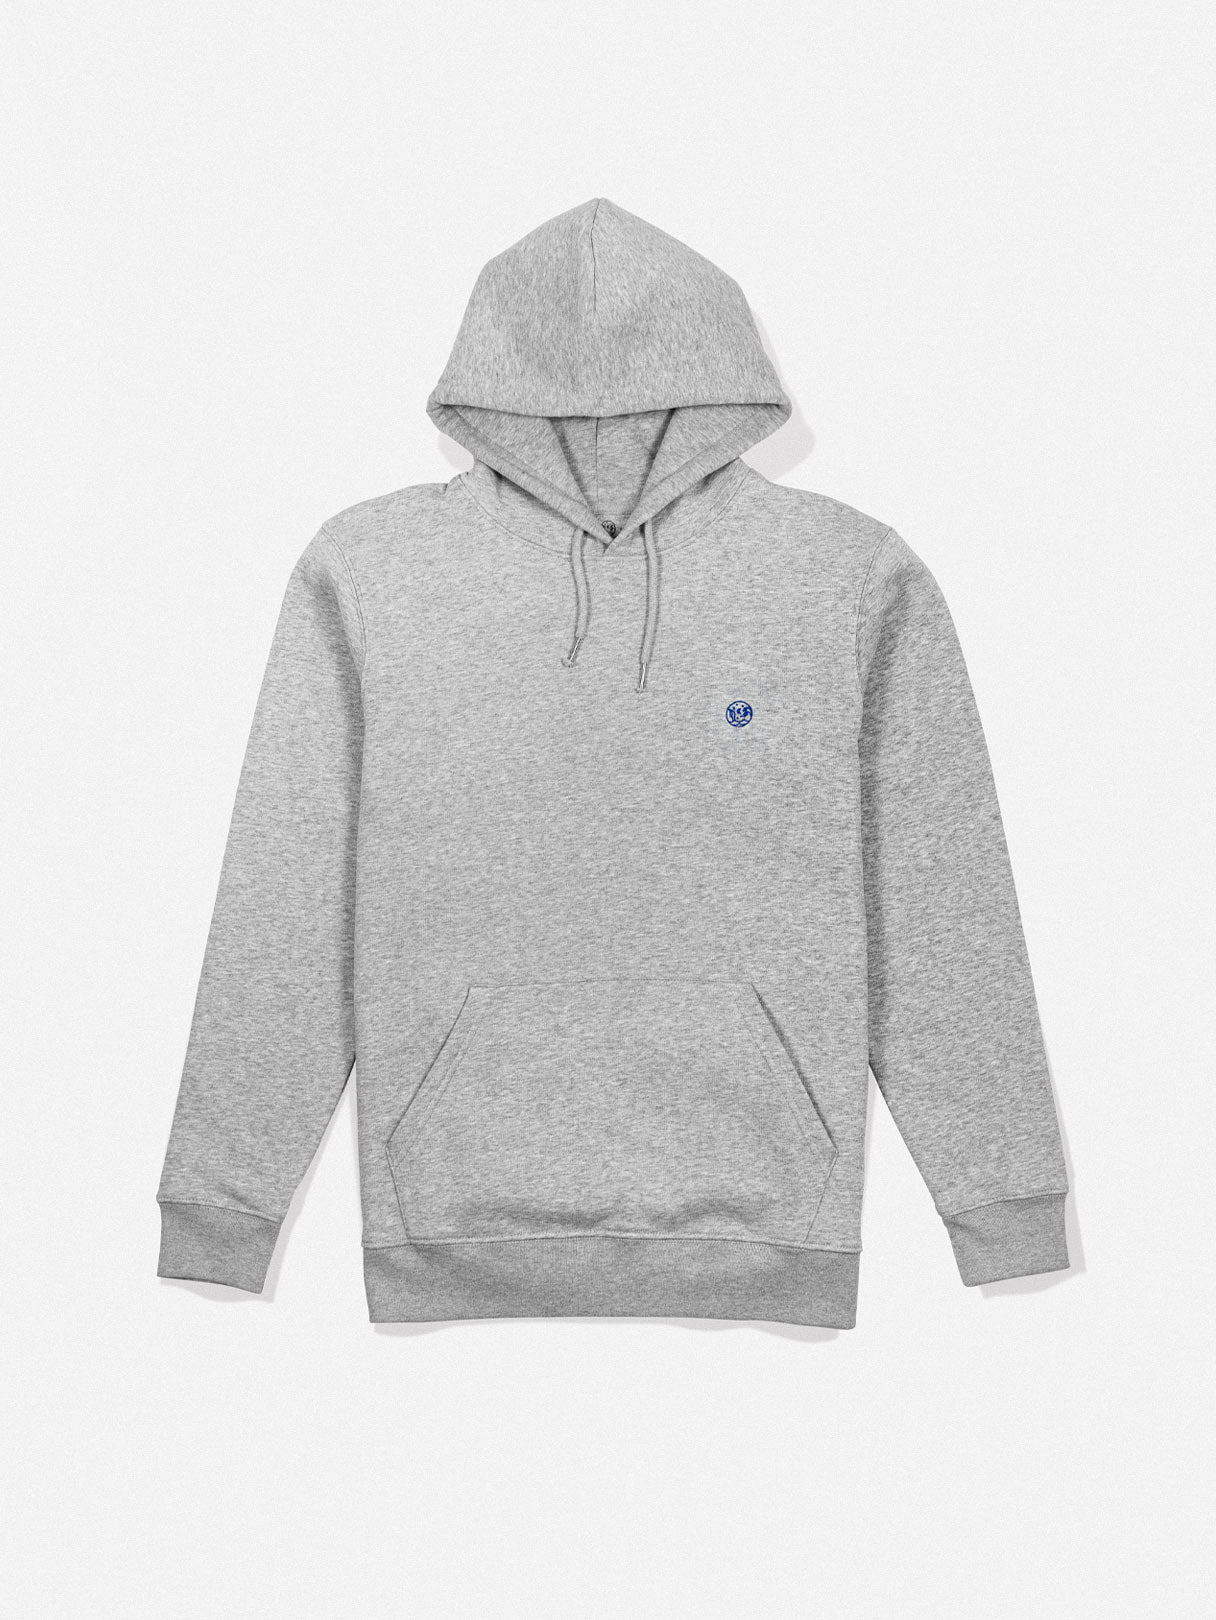 Eisbach — Unisex Hoodie - Youth Lagoon